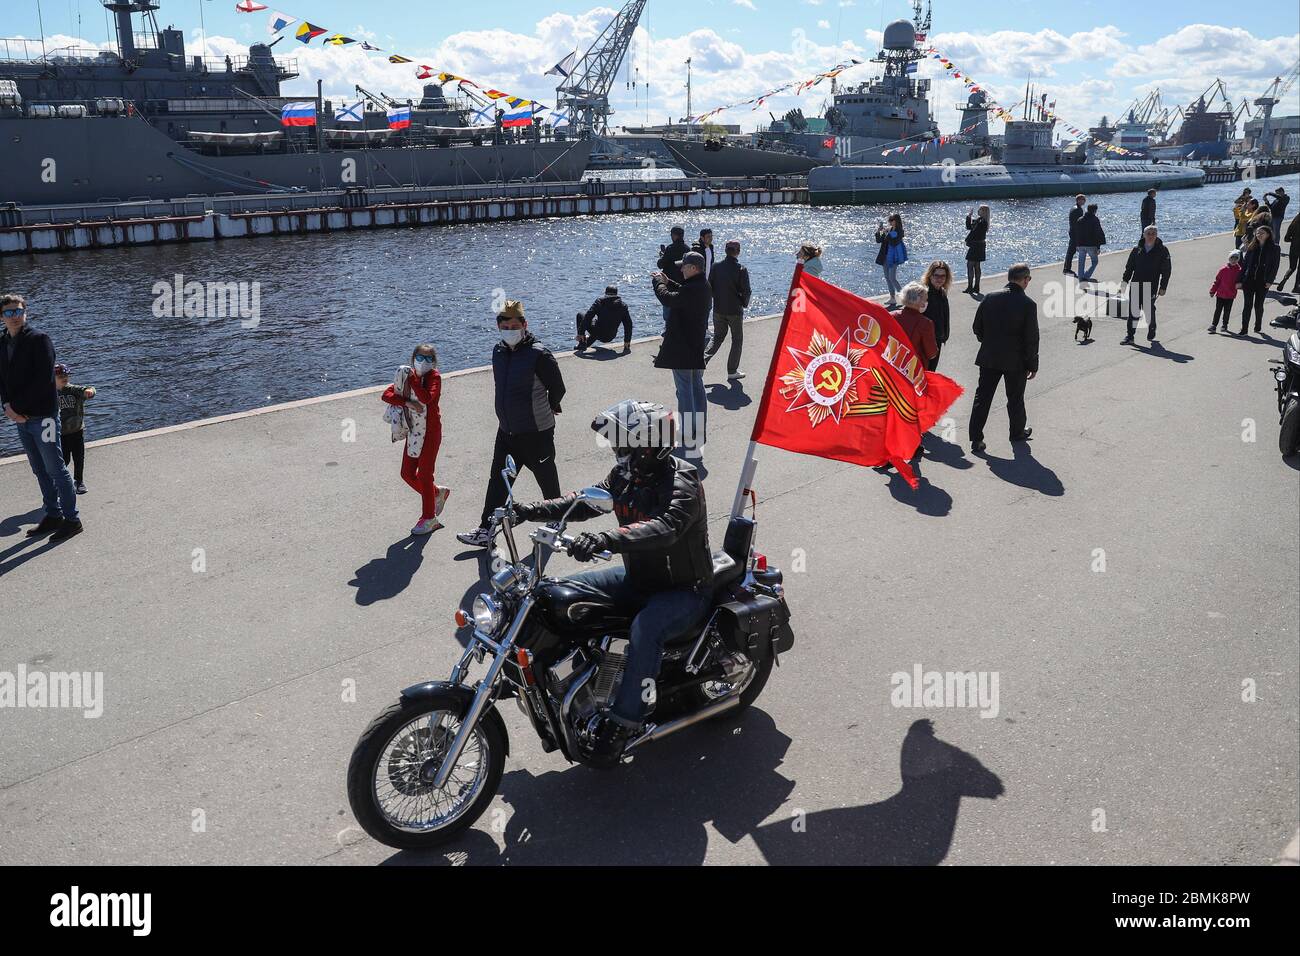 Saint Petersburg, Russia. 09th May, 2020. People are seen on the embankment of the Neva River while a motorcycle pass through during the Victory Day celebration.Victory Day celebrated on May 9 in Russia, the ground part of the parade was postponed as a preventive measure against the spread of the coronavirus disease (COVID-19) pandemic Credit: SOPA Images Limited/Alamy Live News Stock Photo